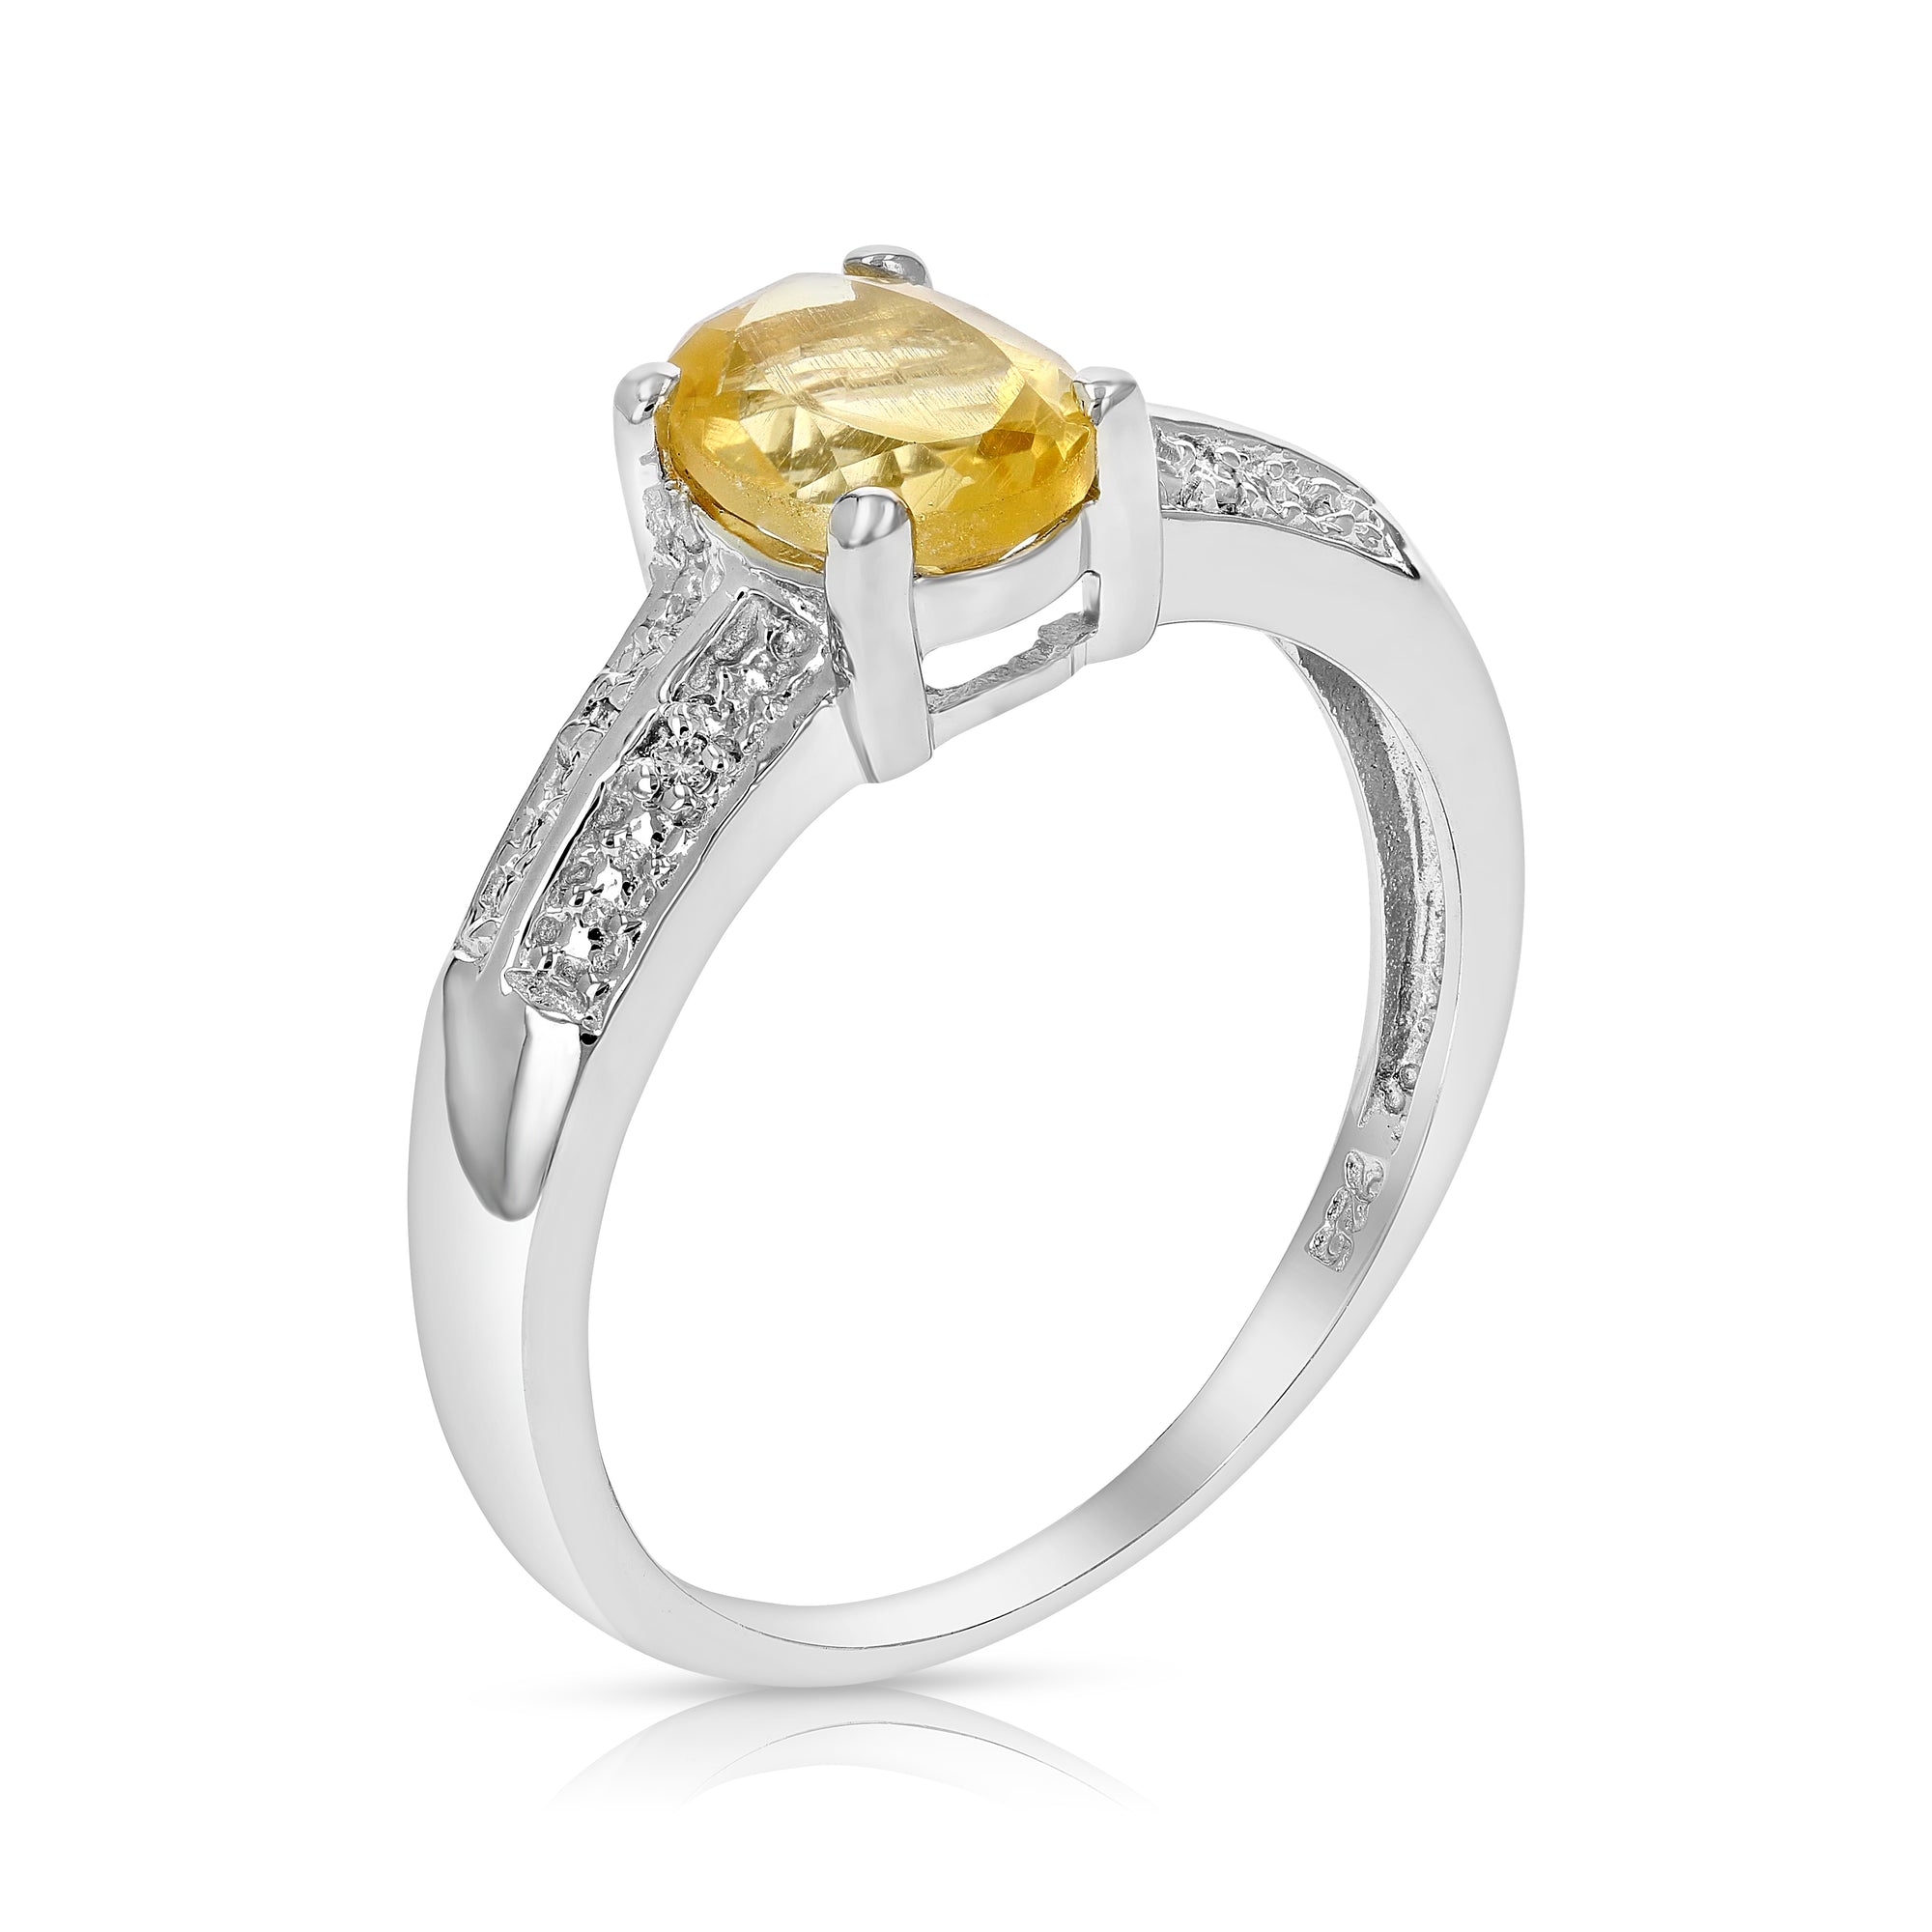 1.23 cttw Citrine and Diamond Ring .925 Sterling Silver with Rhodium Oval Shape